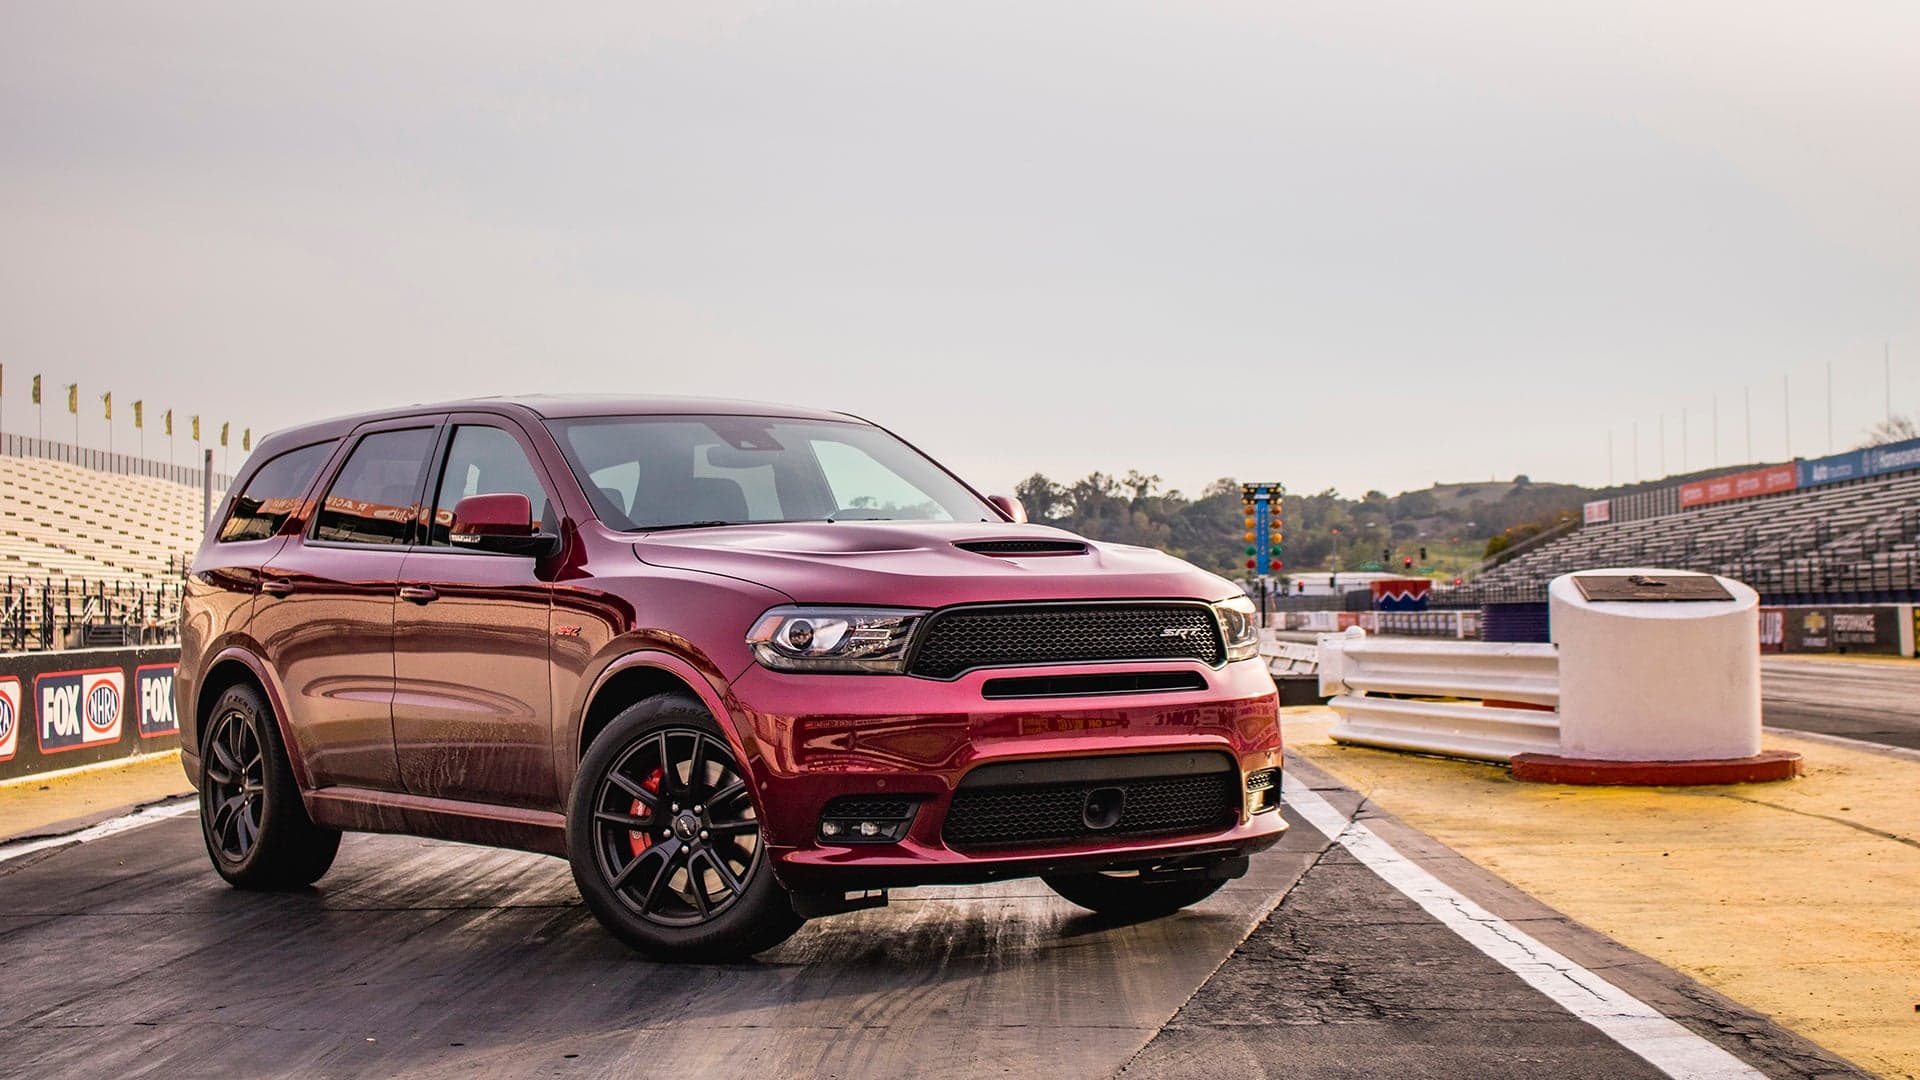 2018 Dodge Durango SRT, Durango Citadel Review: The 3-Row Family SUV with a Muscle Car’s Heart